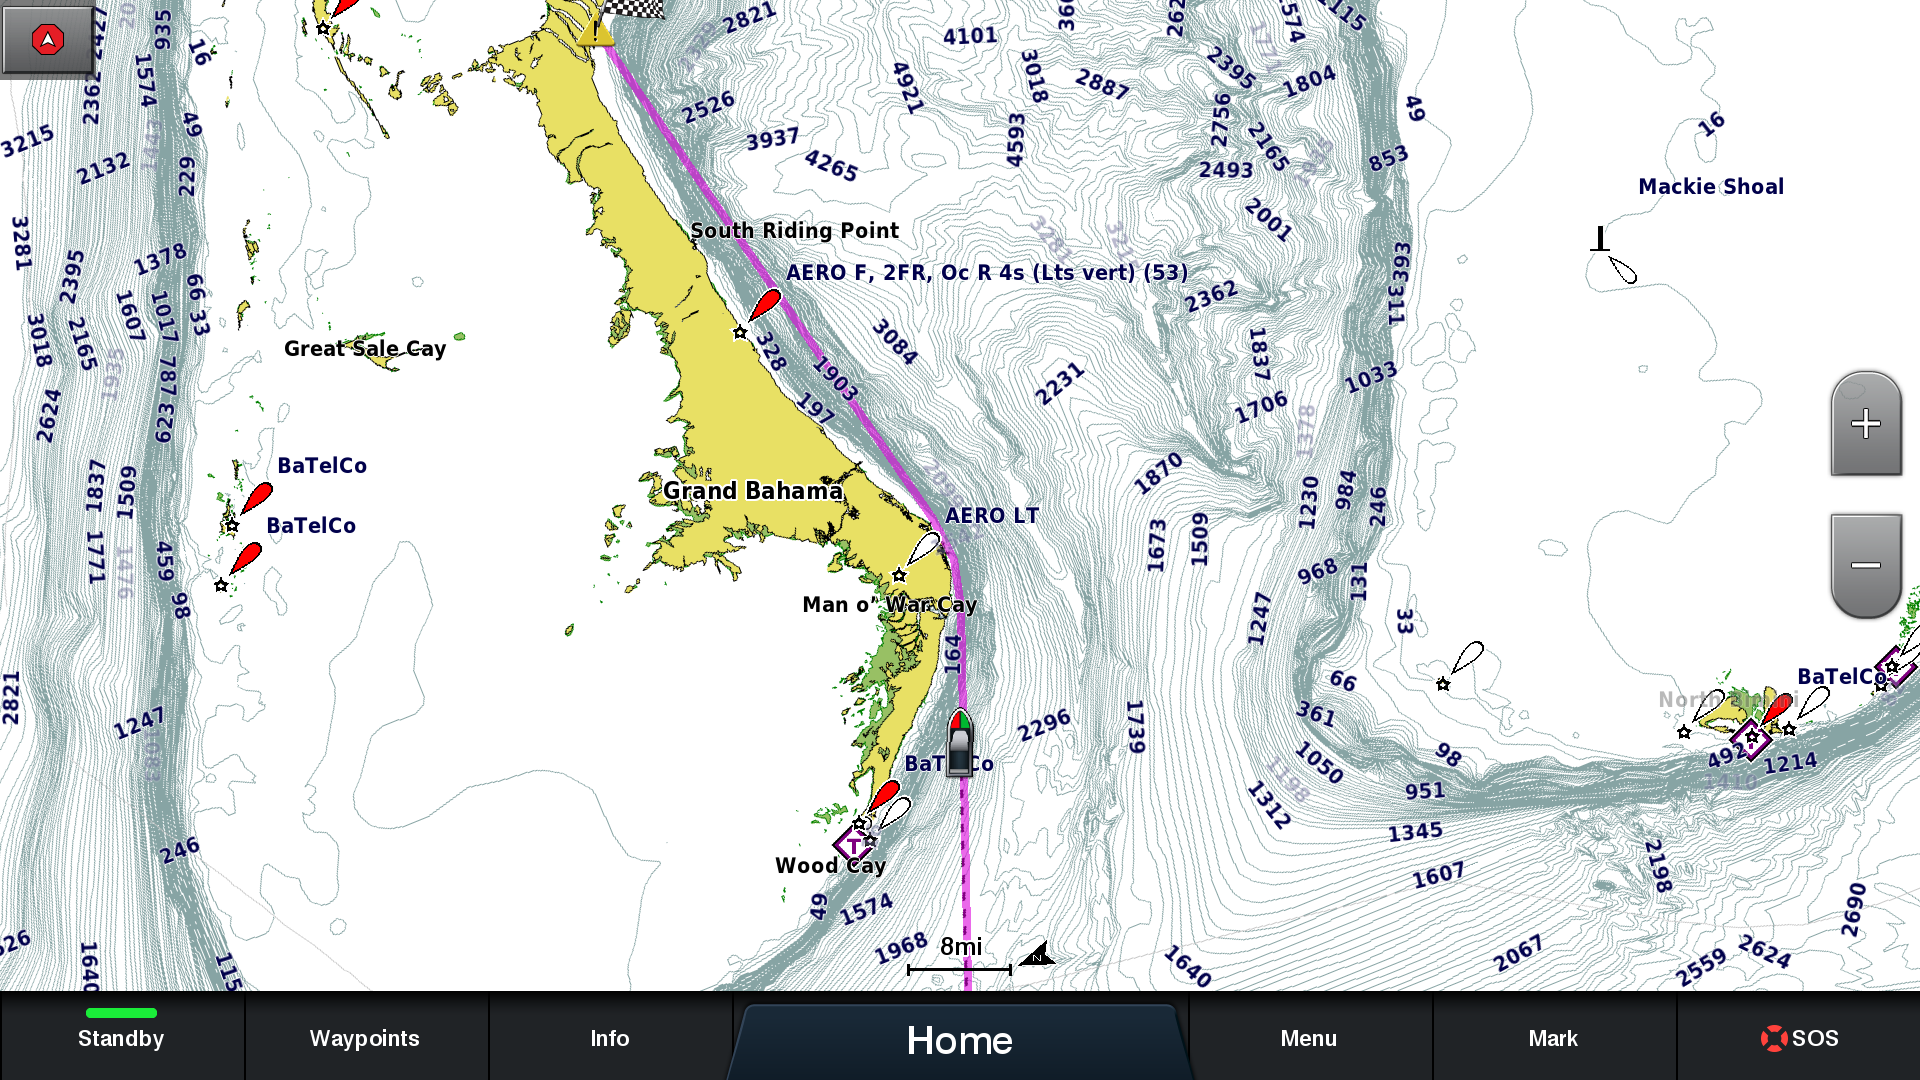 The Best of Garmin with the Best of Navionics
